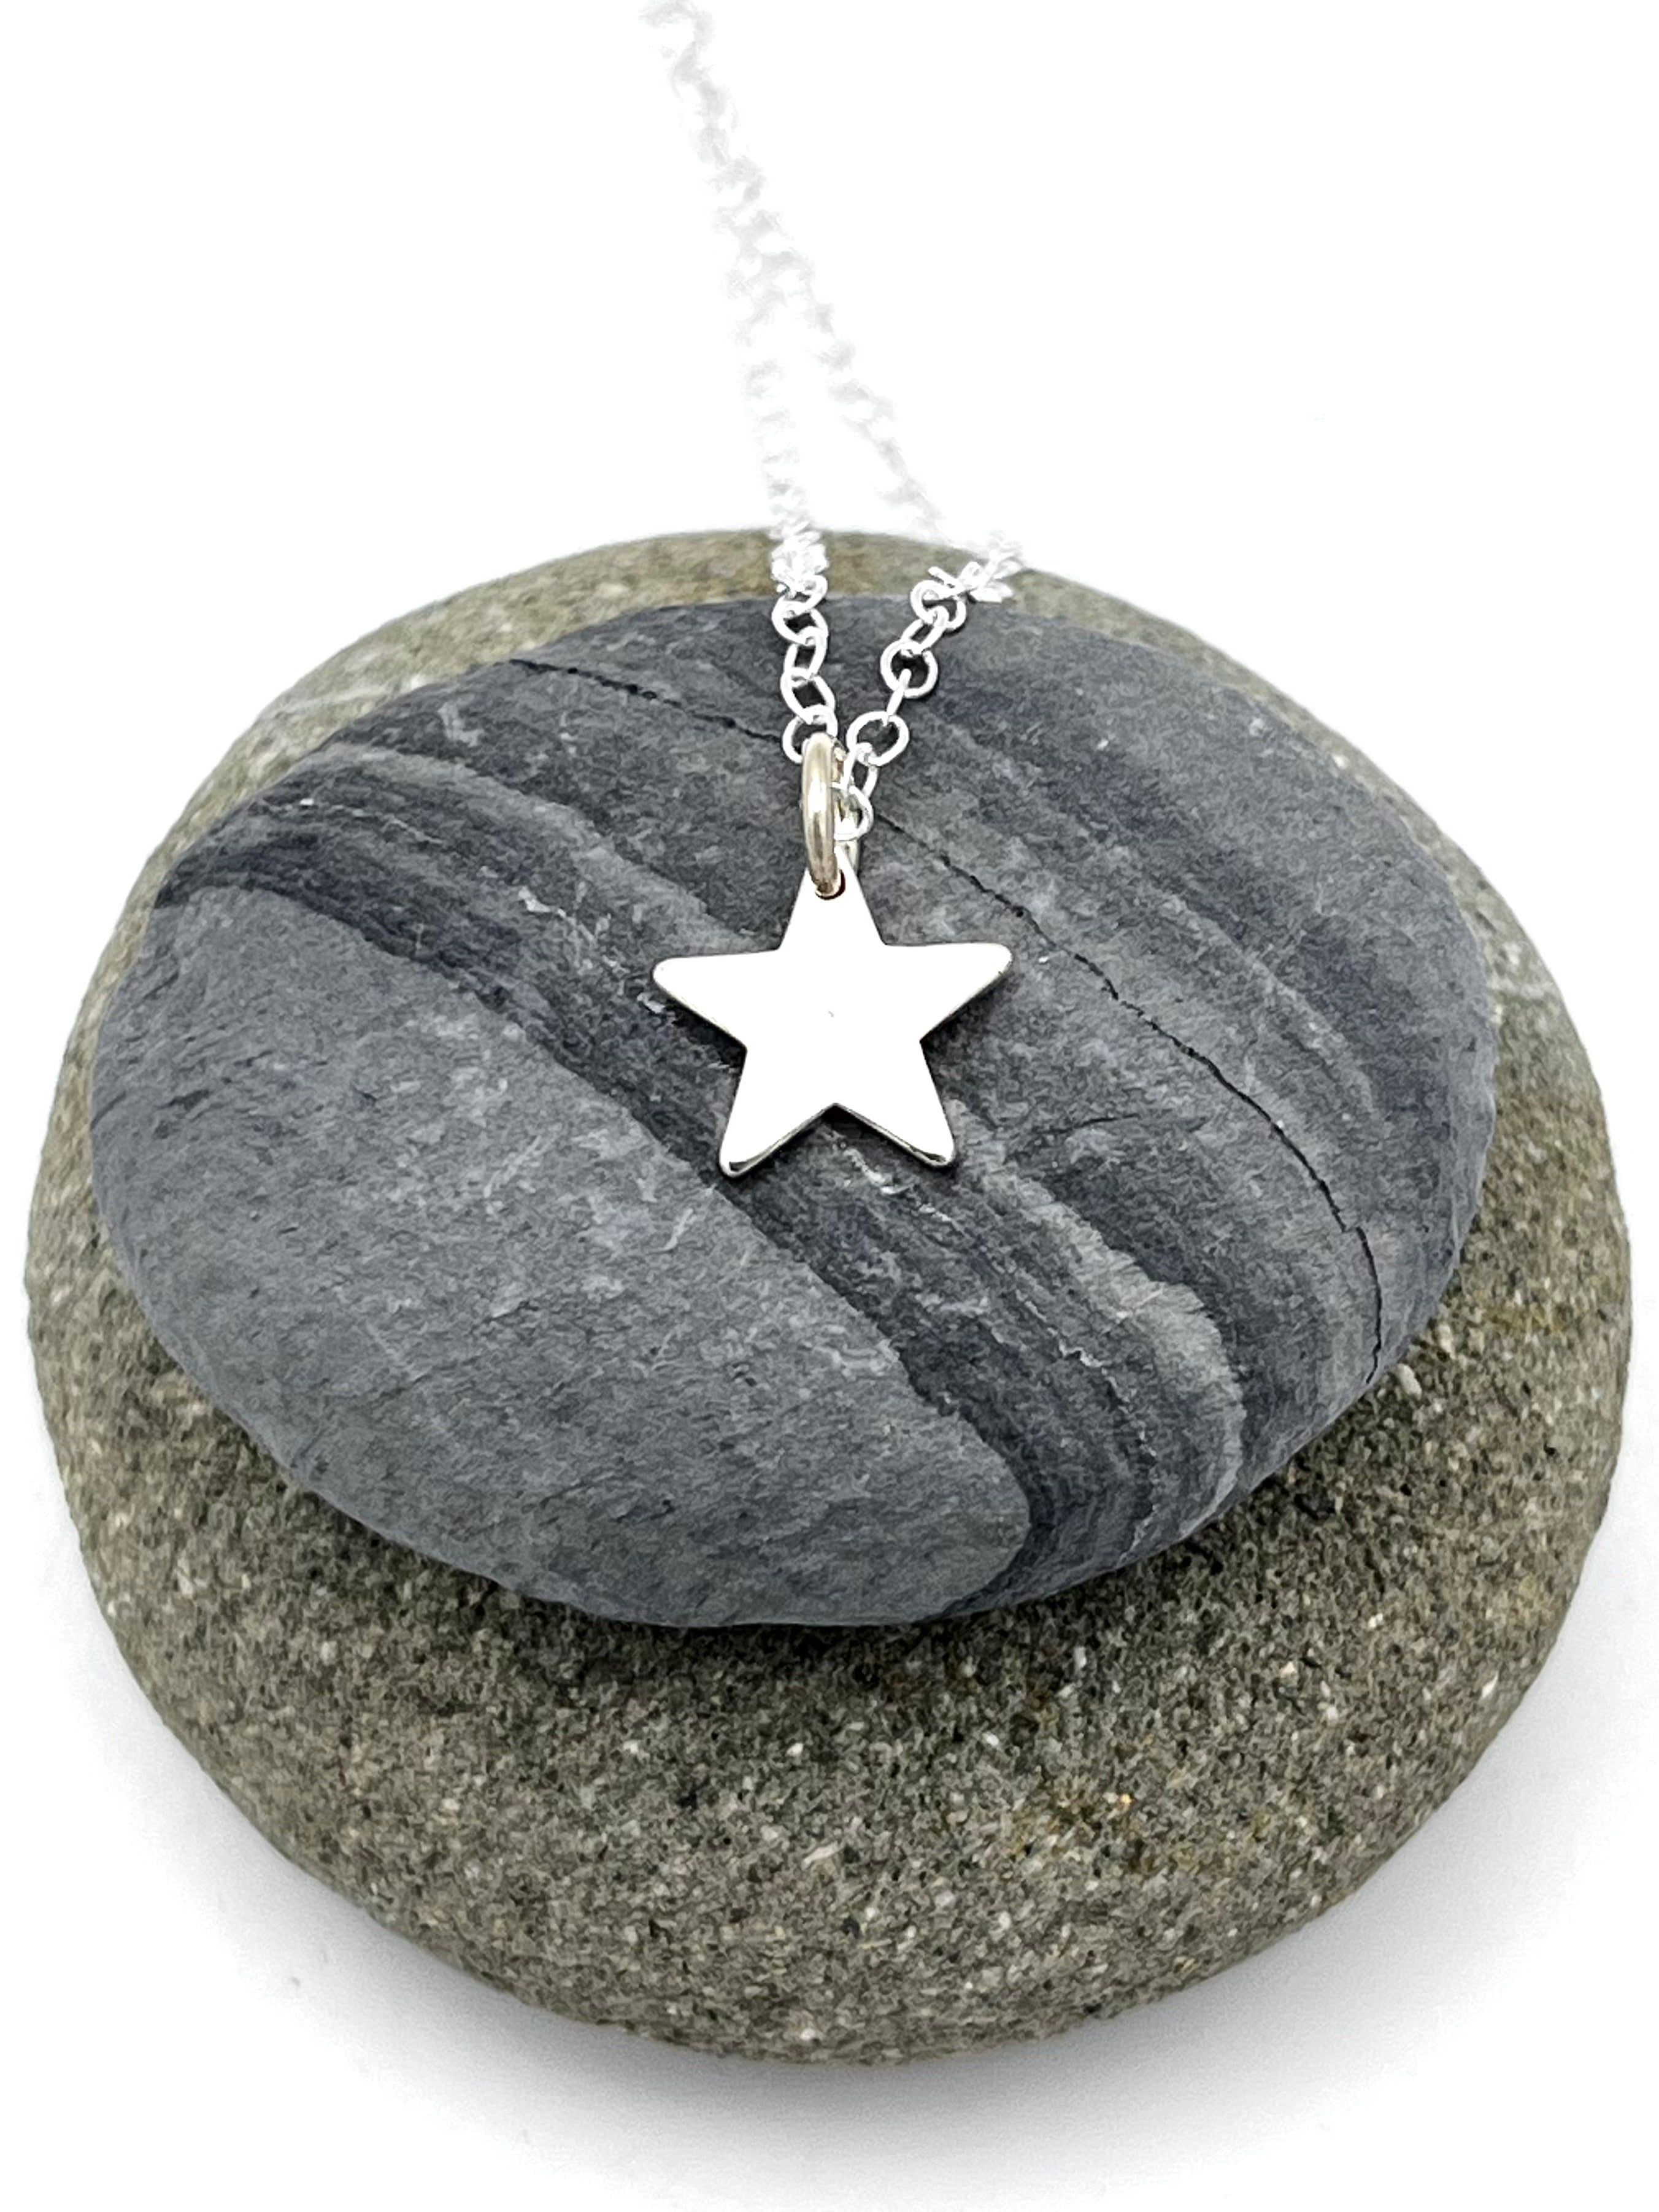 Single Star pendant 10mm wide polished finish on 16" chain